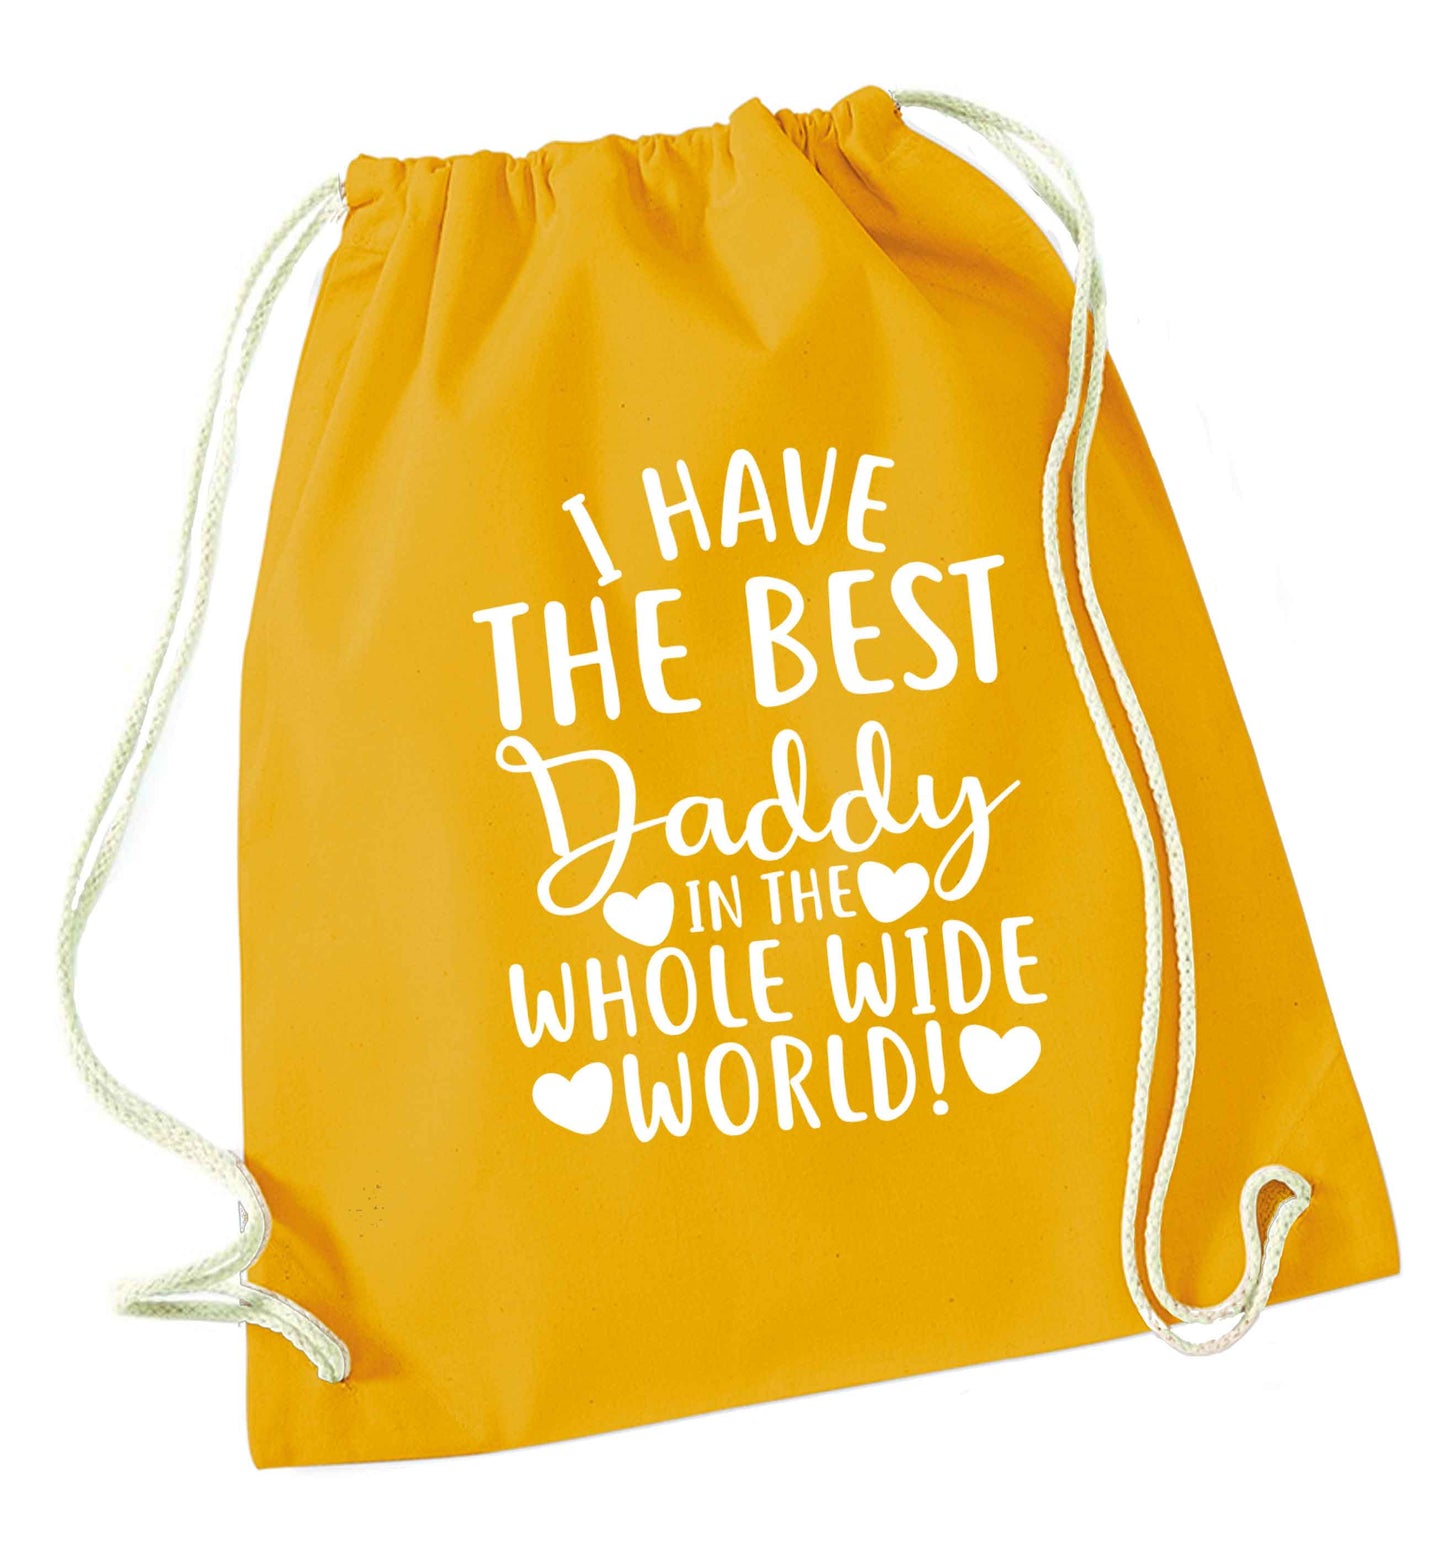 I have the best daddy in the whole wide world mustard drawstring bag